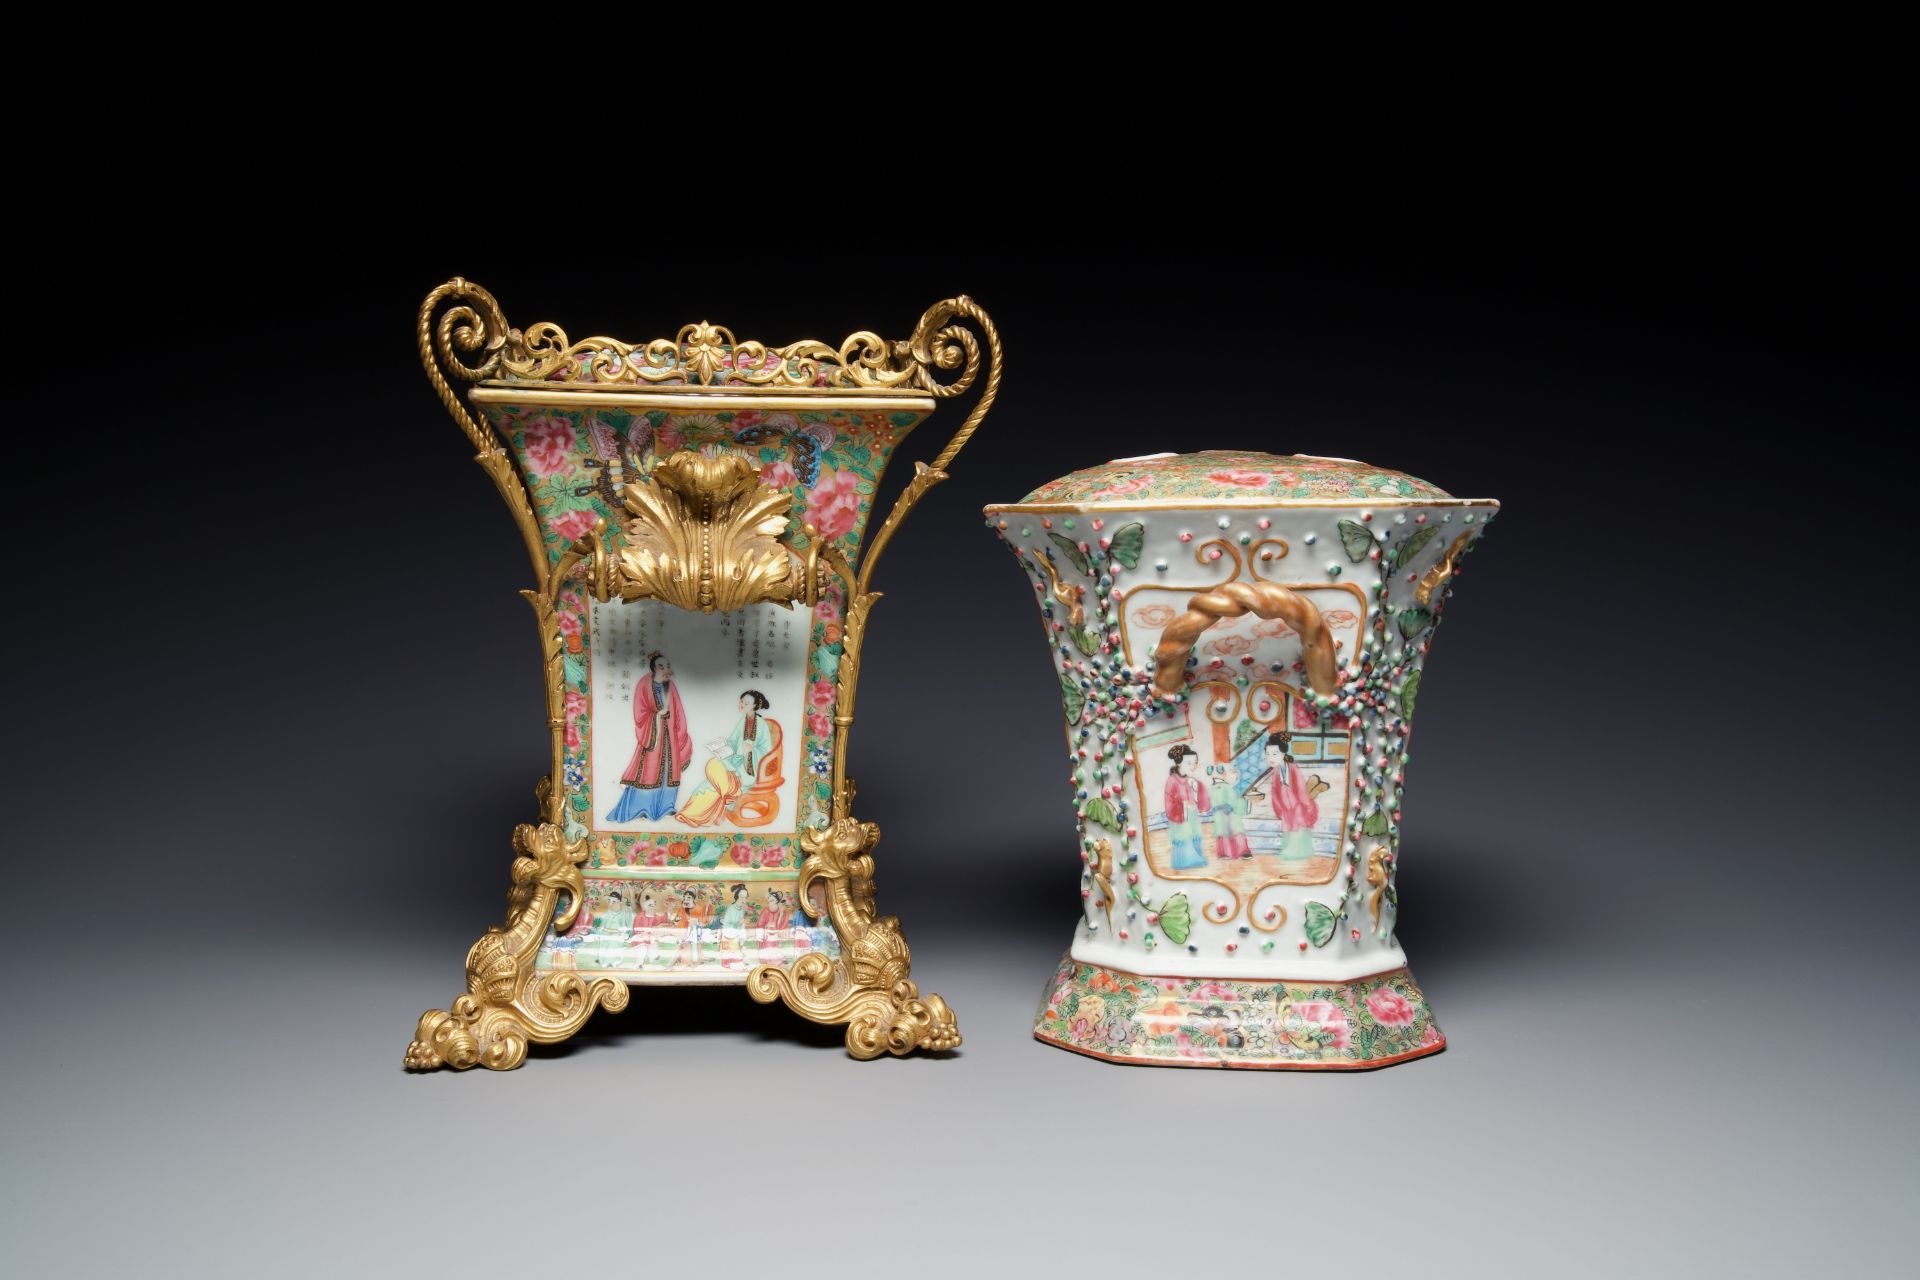 Two fine Chinese Canton famille rose flower holders, one with a gilt bronze mount, 19th C. - Image 3 of 7